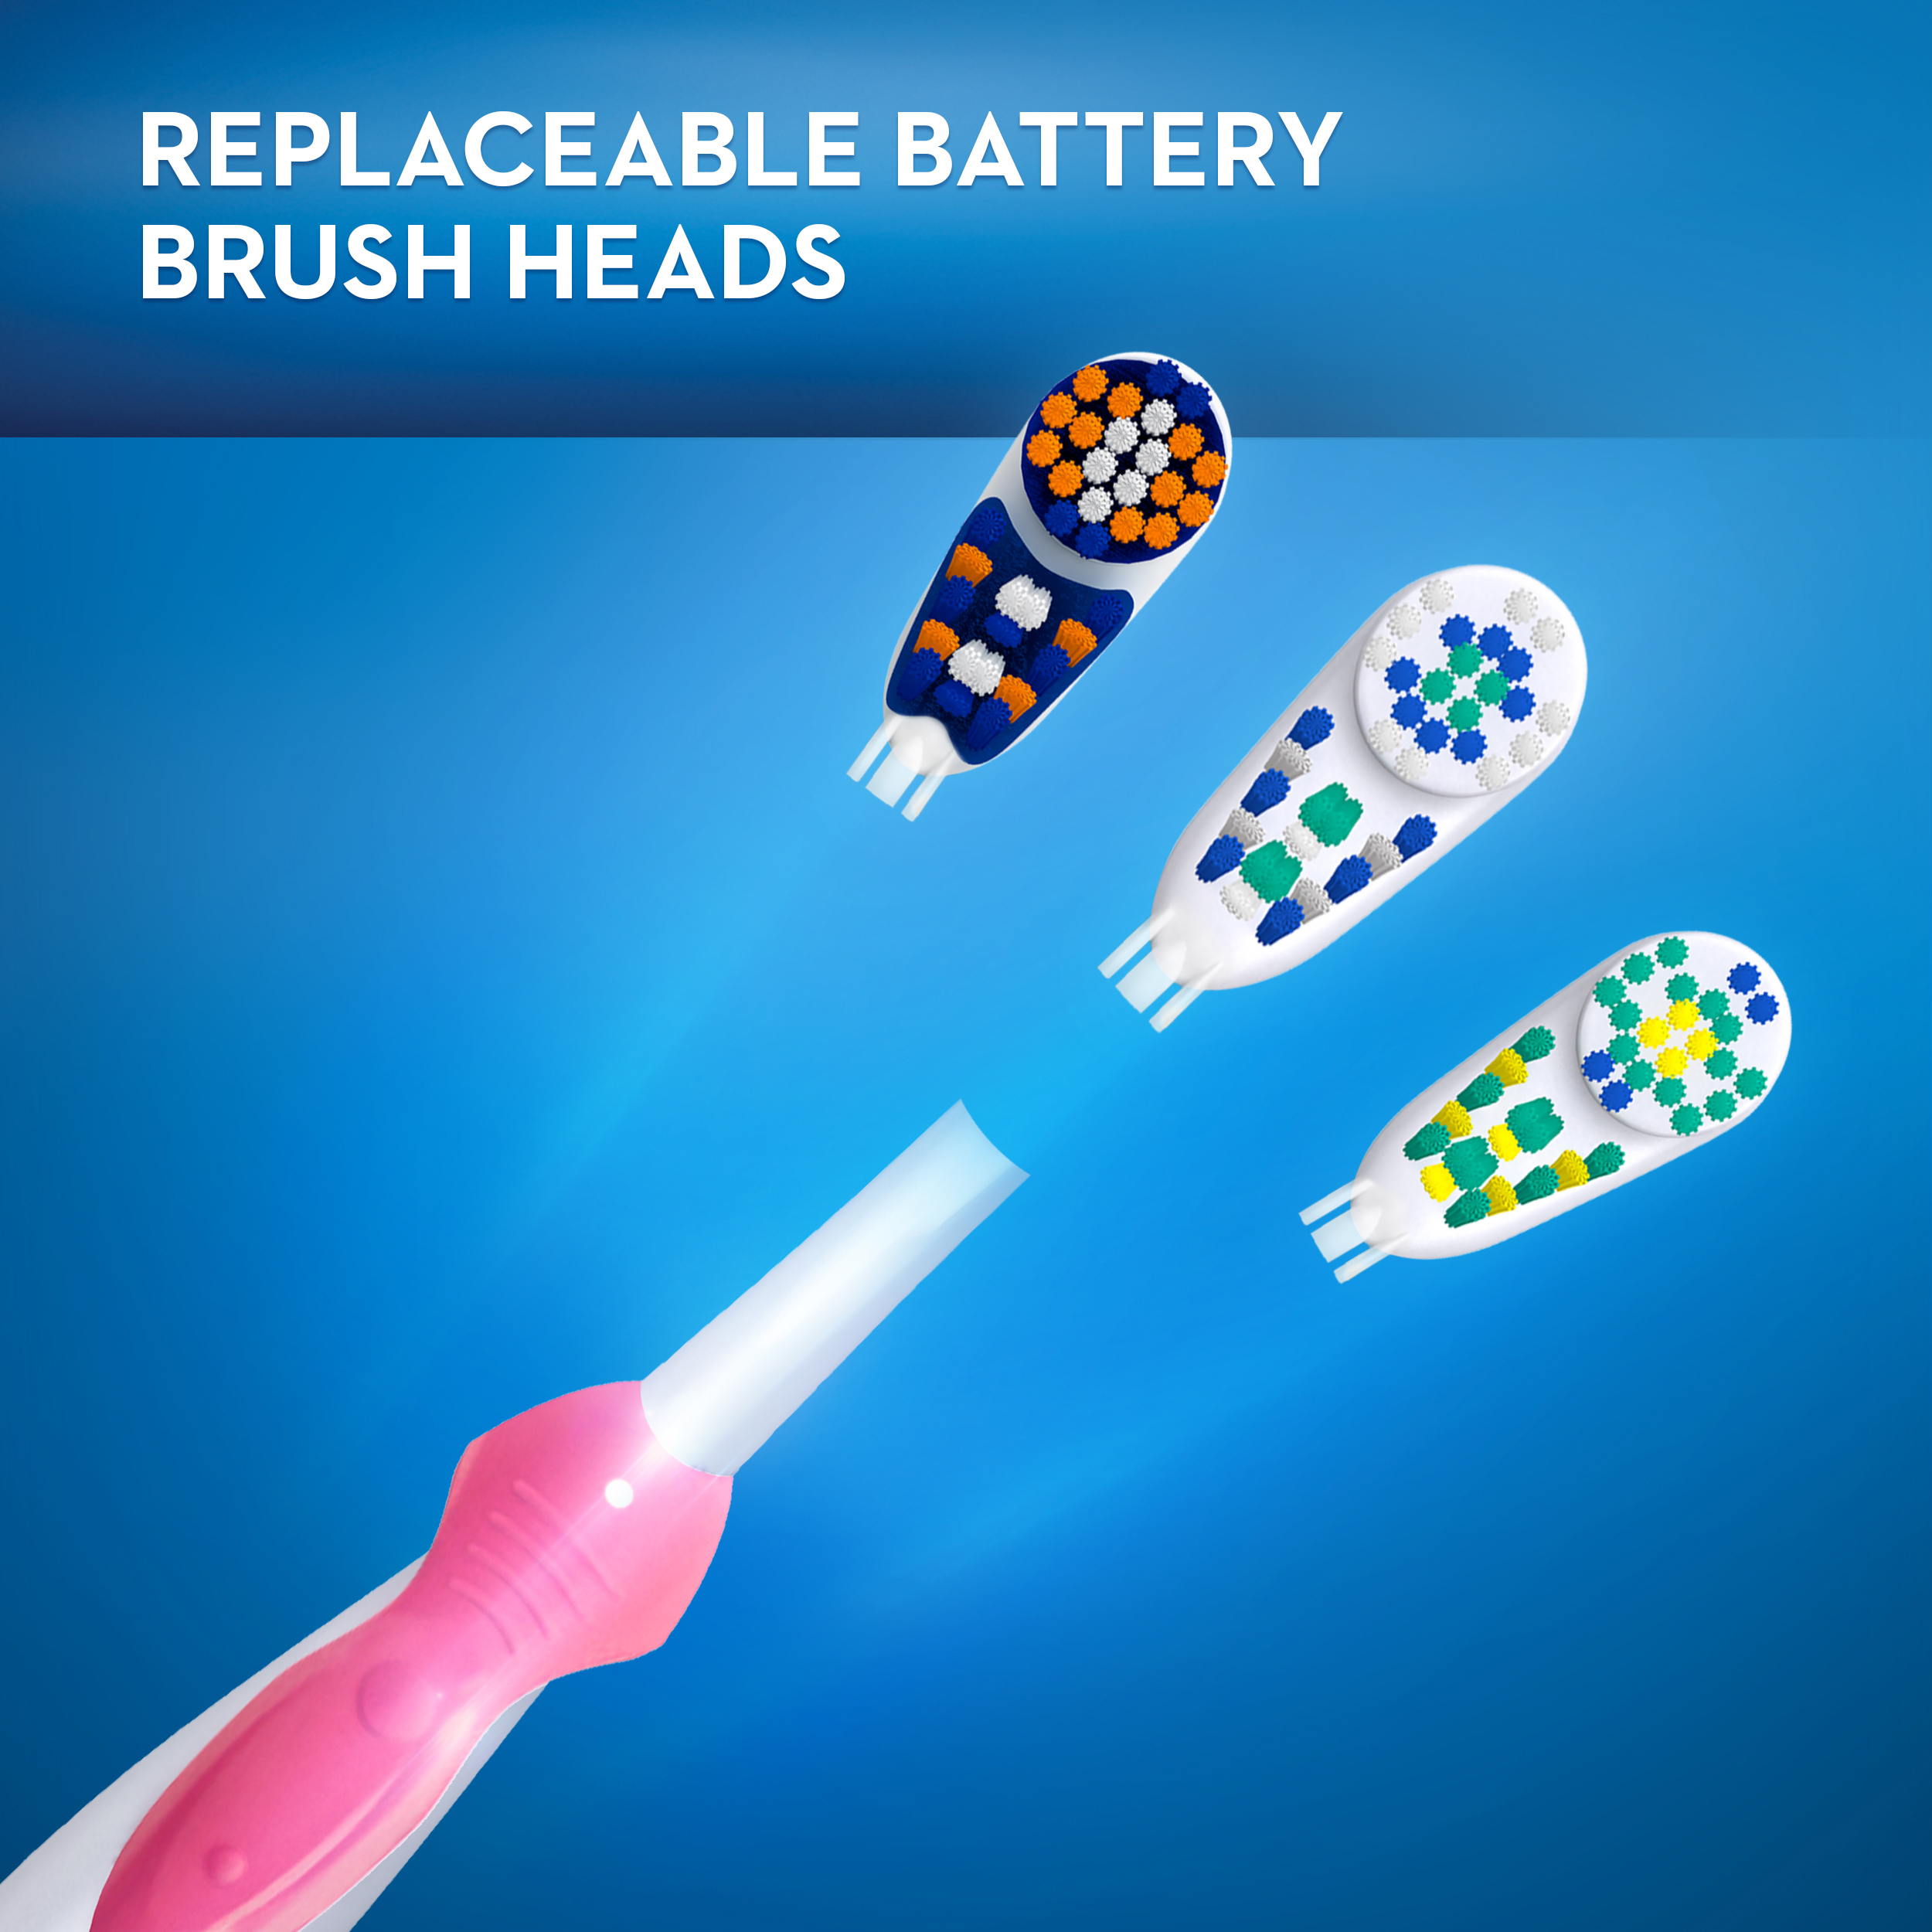 Oral-B Deep Clean Battery Powered Toothbrush Replacement Brush Heads, 2 Count - image 5 of 6